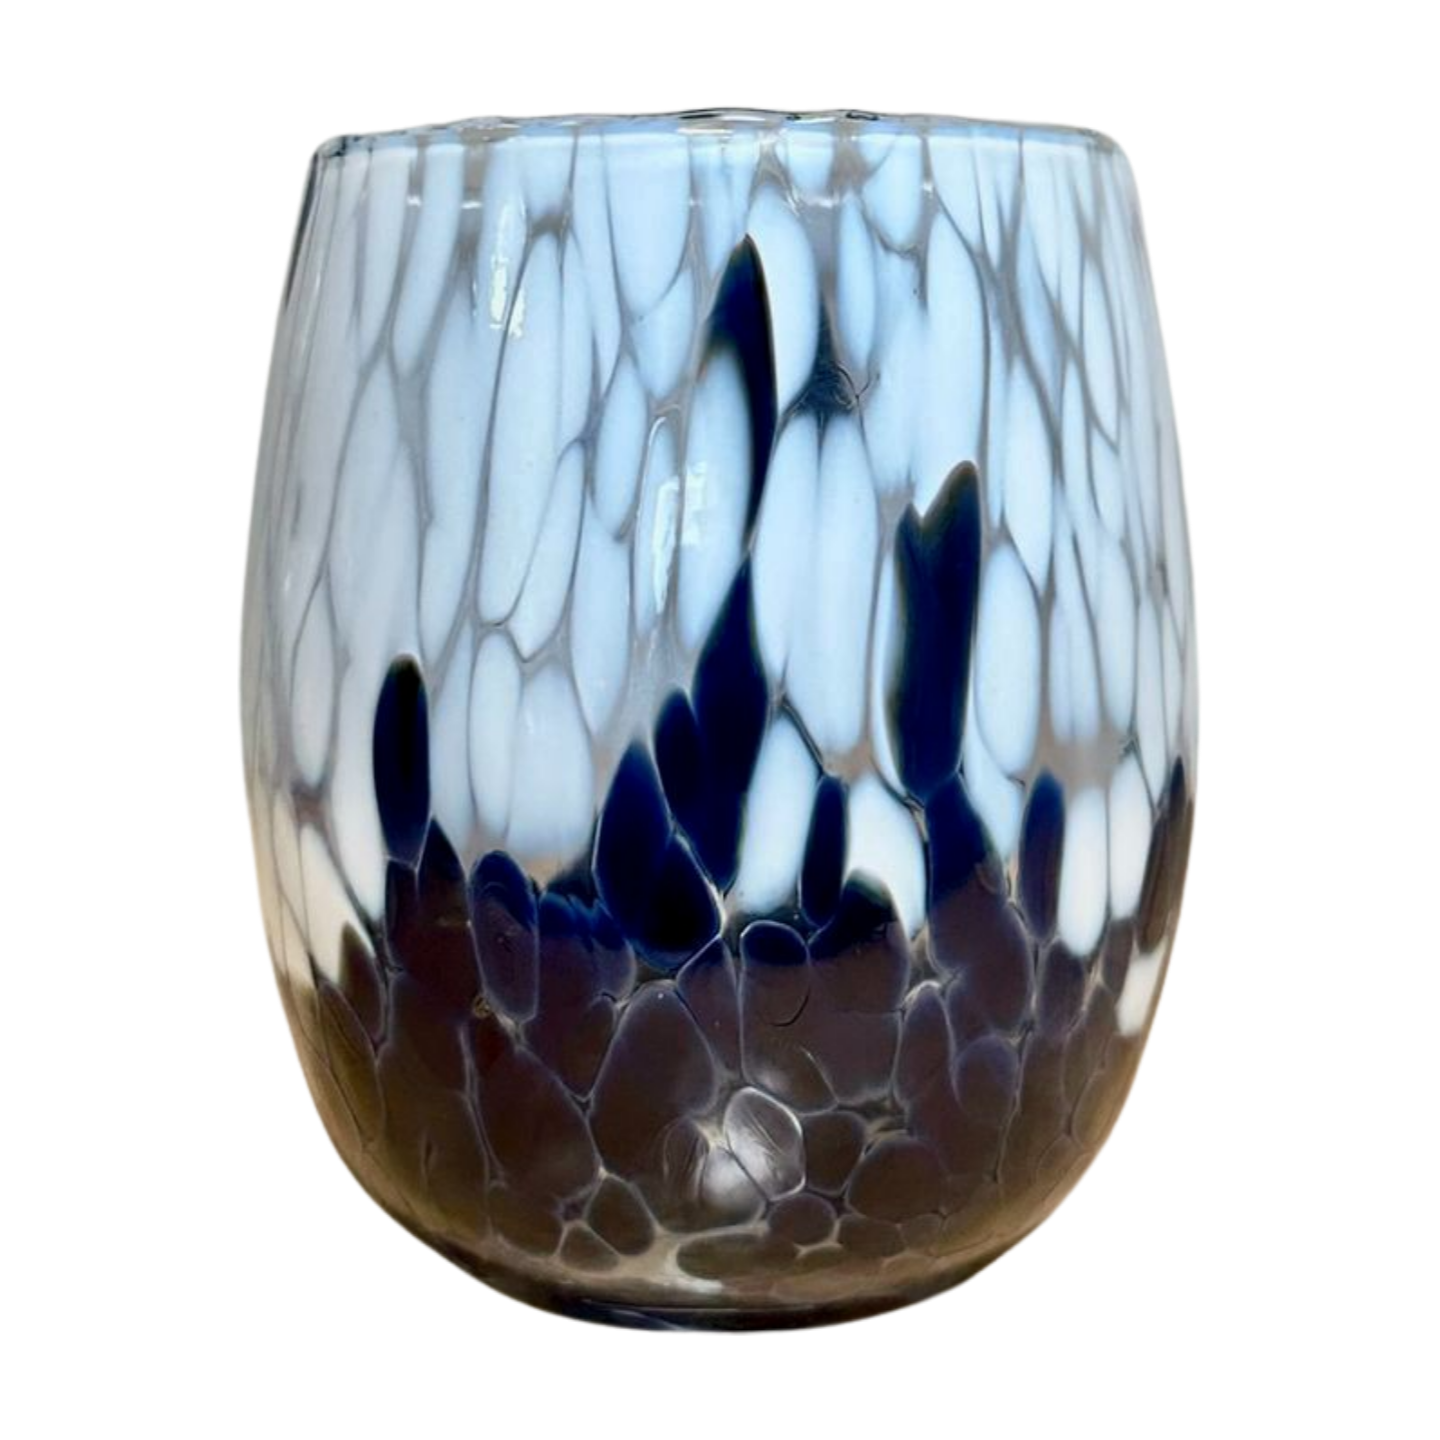 Stemless Murano Wine Glass, Two-Tone shown in navy.